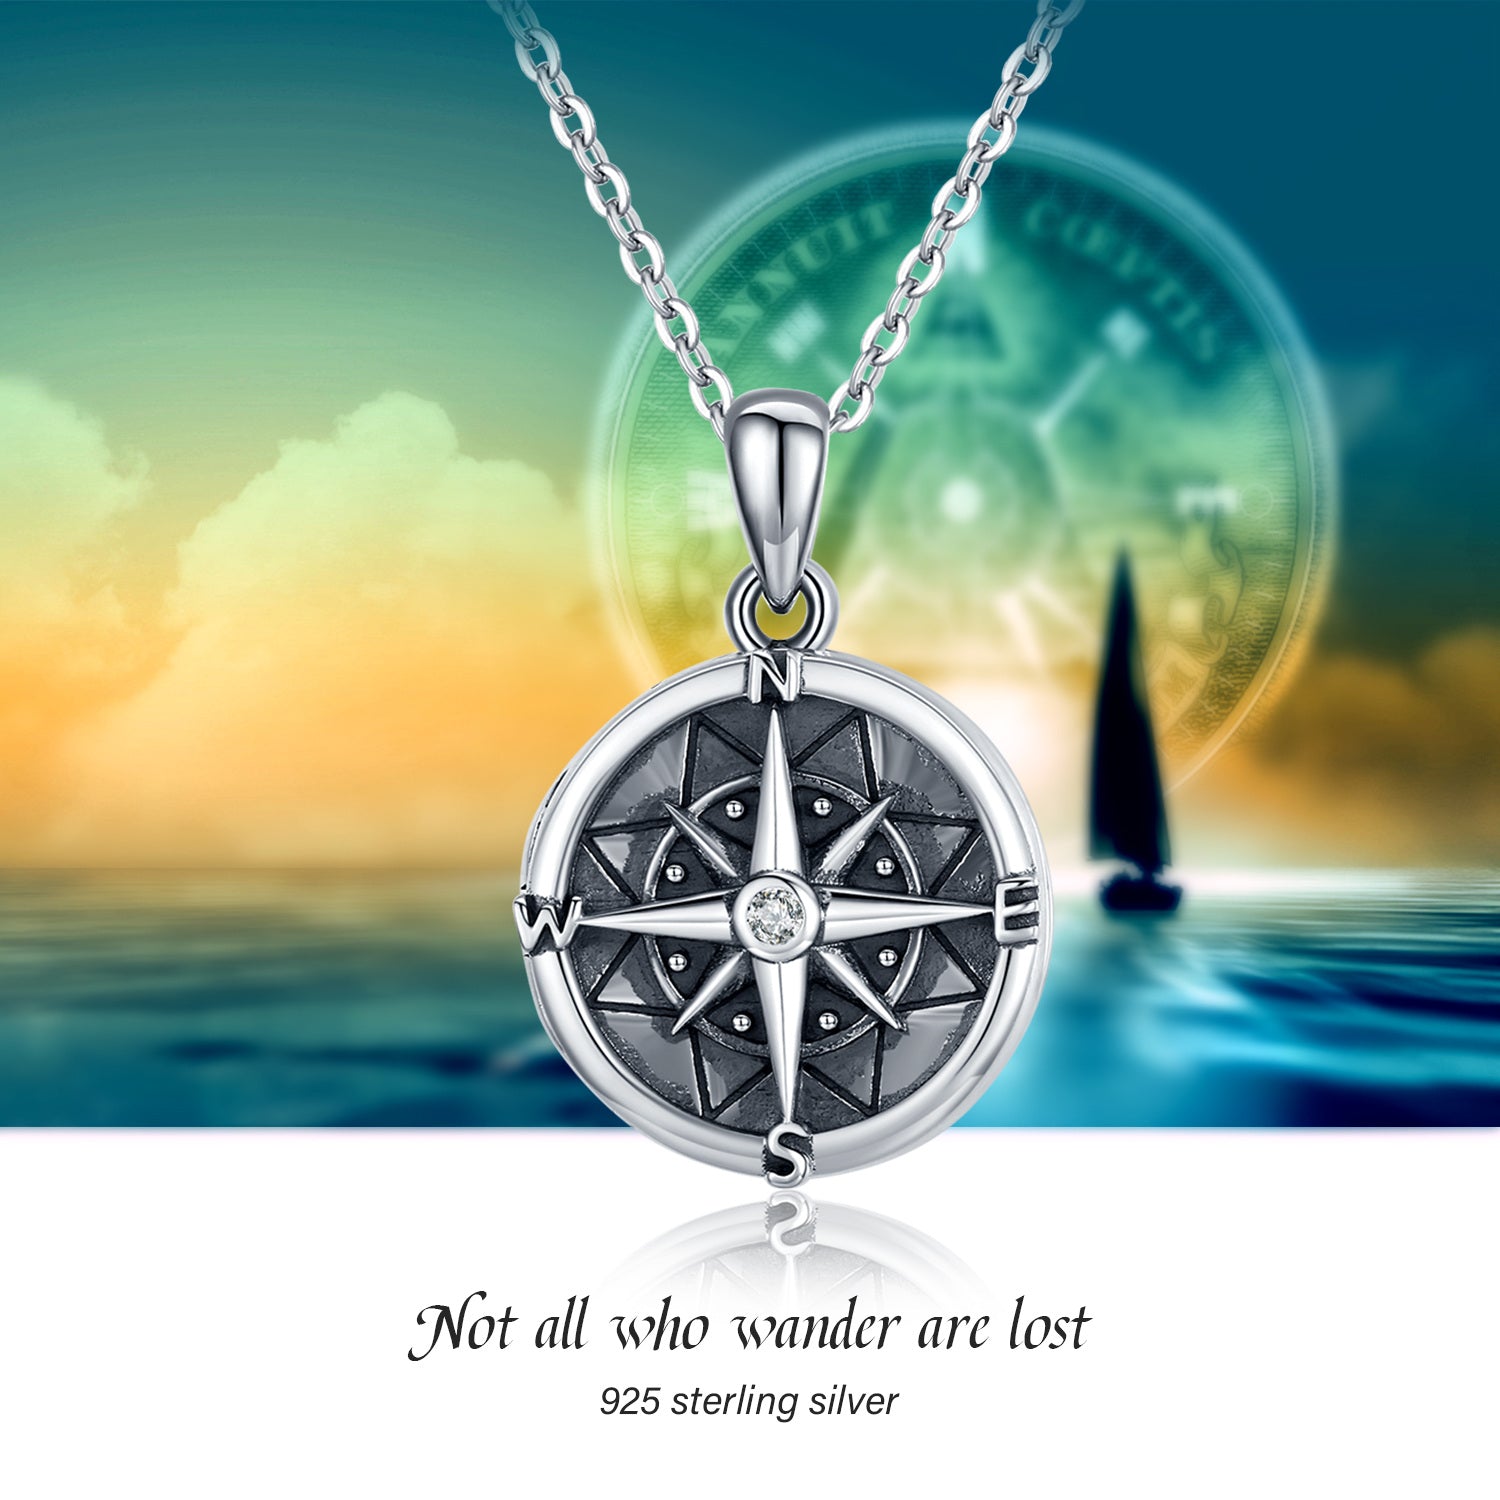 I'm Not Lost Compass Photo Necklace graphic